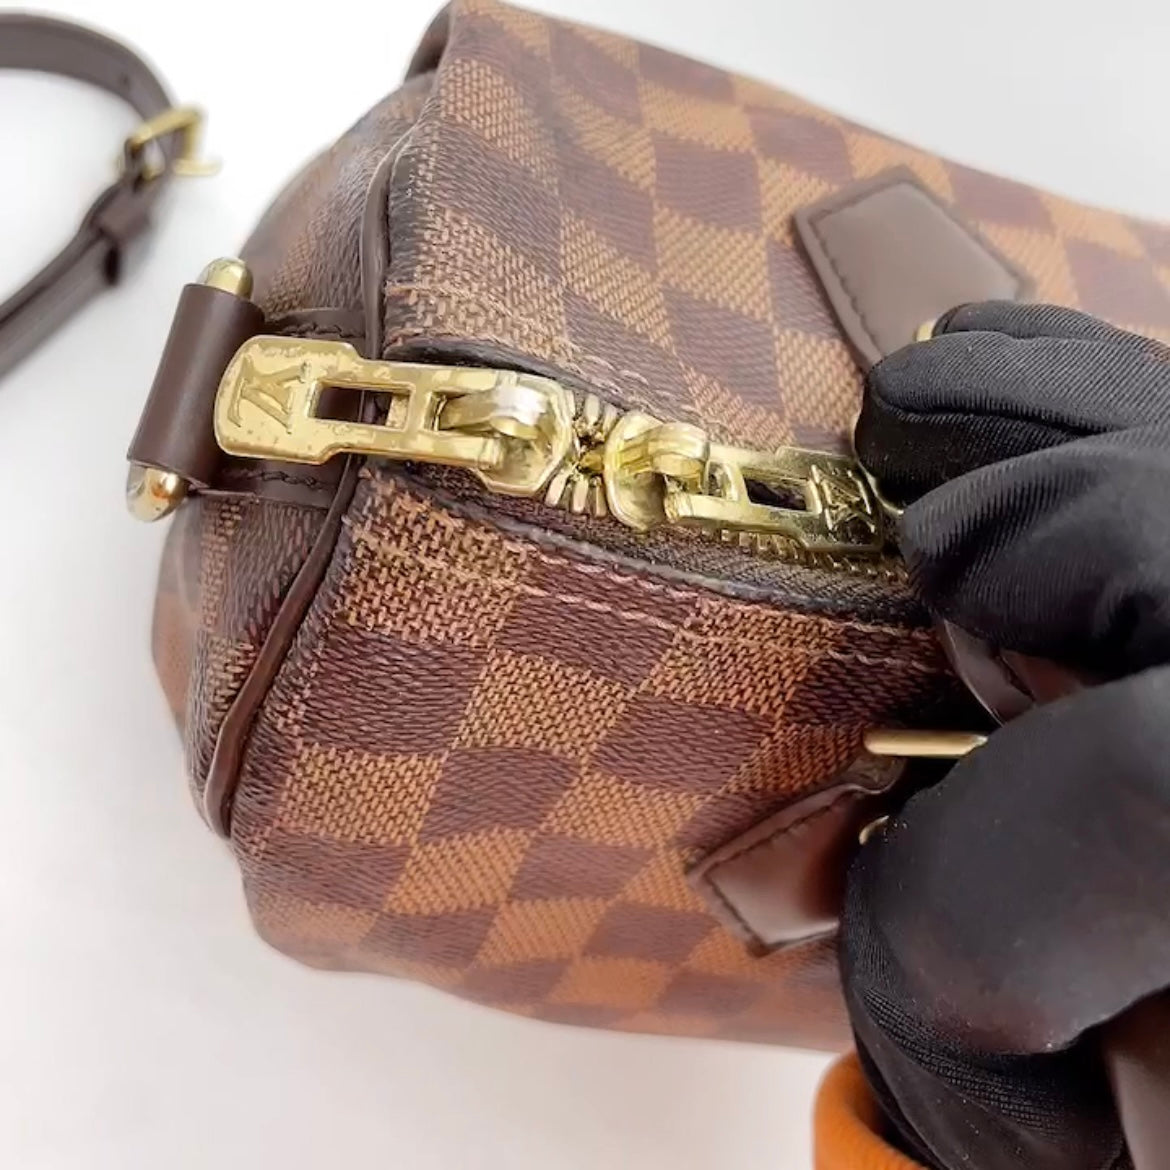 Bought Speedy LV bag on Fashionphile and the straps are melted : r